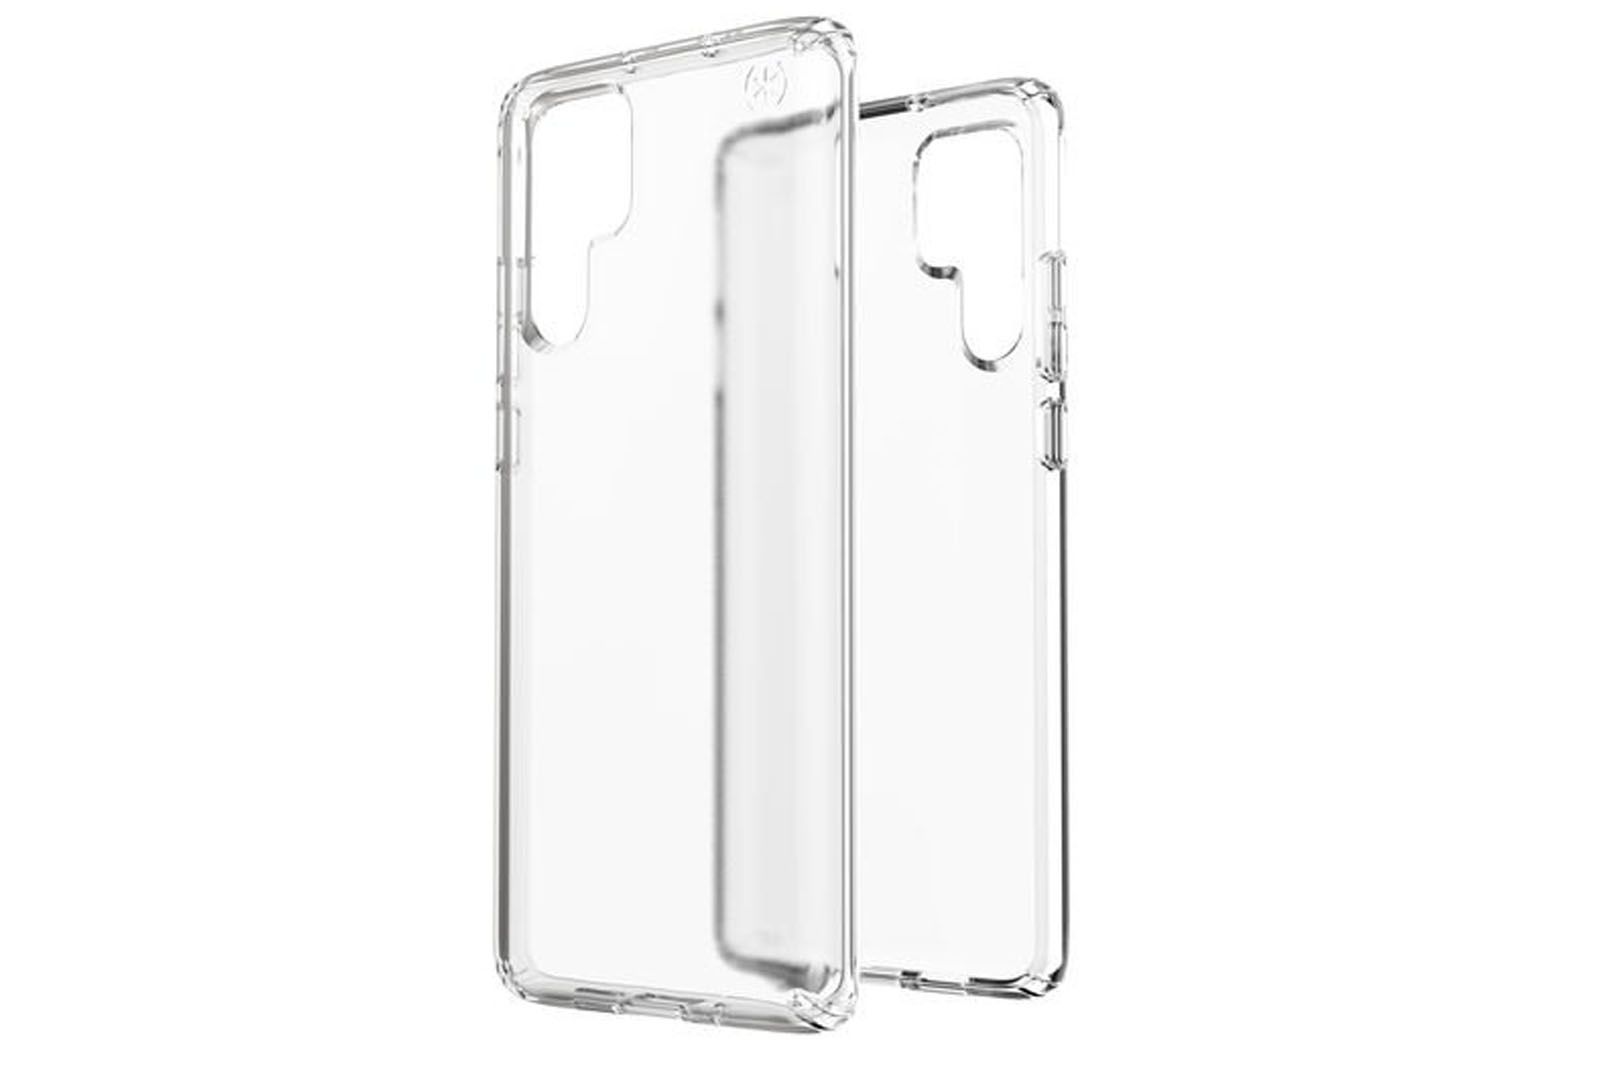 Best P30 And P30 Pro Cases Protect Your New Huawei Device image 3